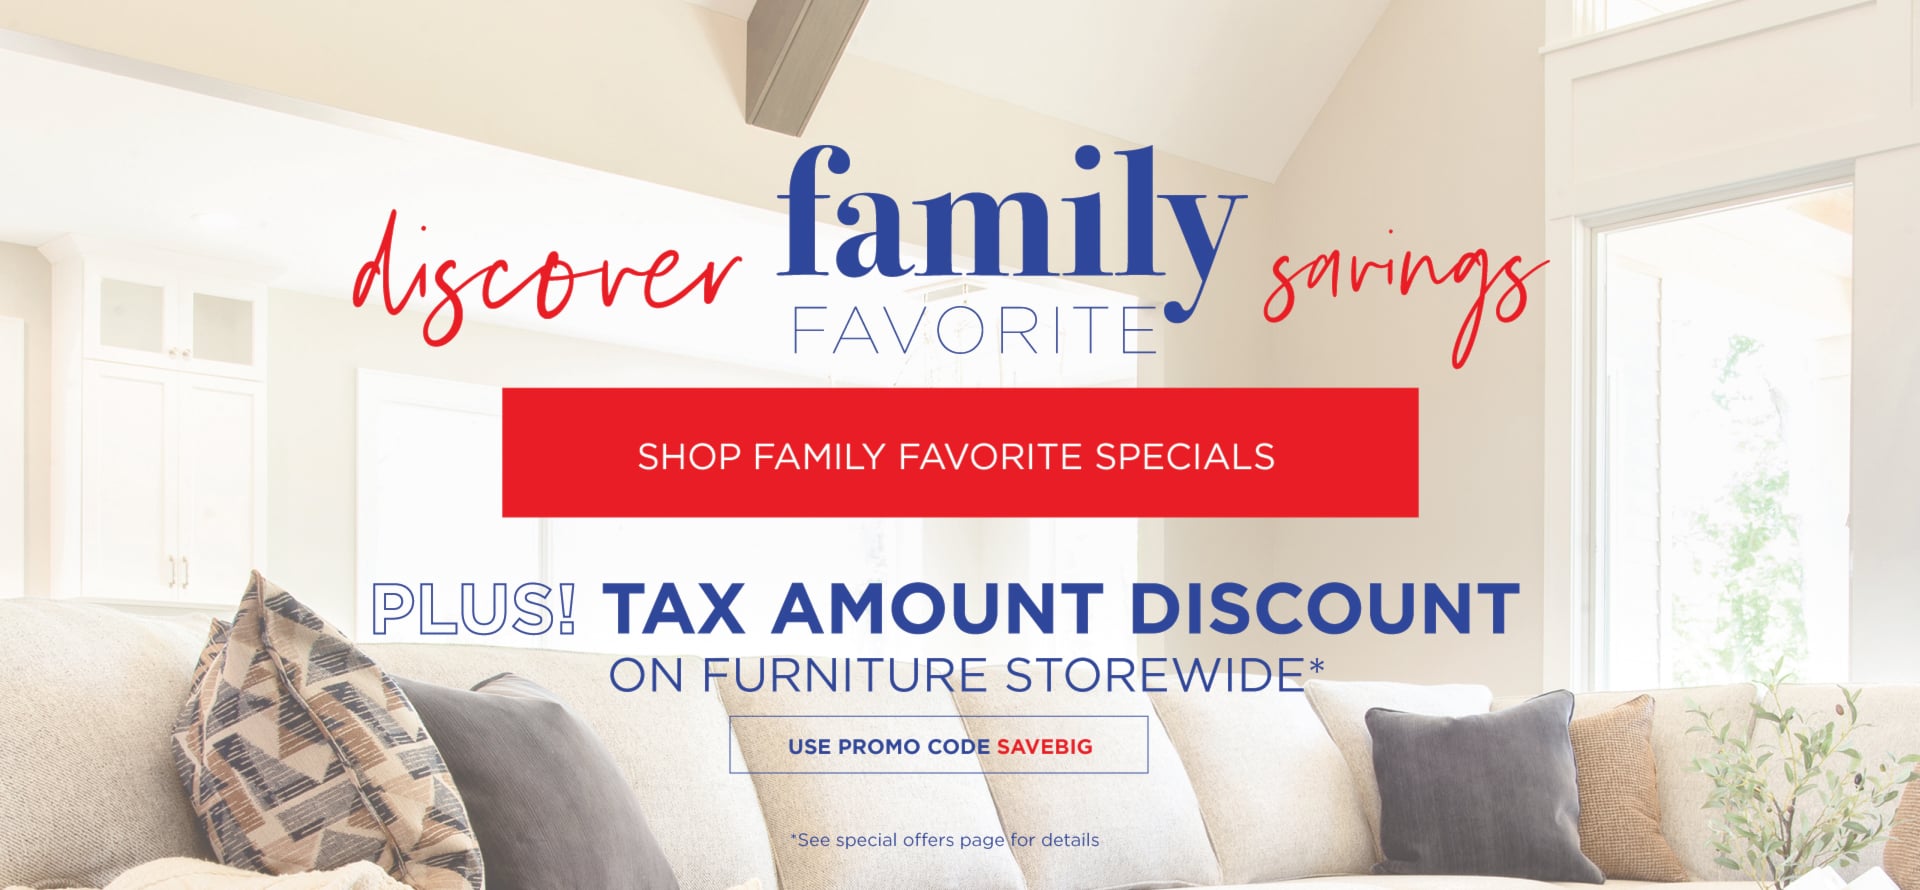 Discover Family Favorite Savings | Shop Family Favorite Specials | Plus Tax Amount Discount on Furniture Storewide*. *See store or special offers page for details.